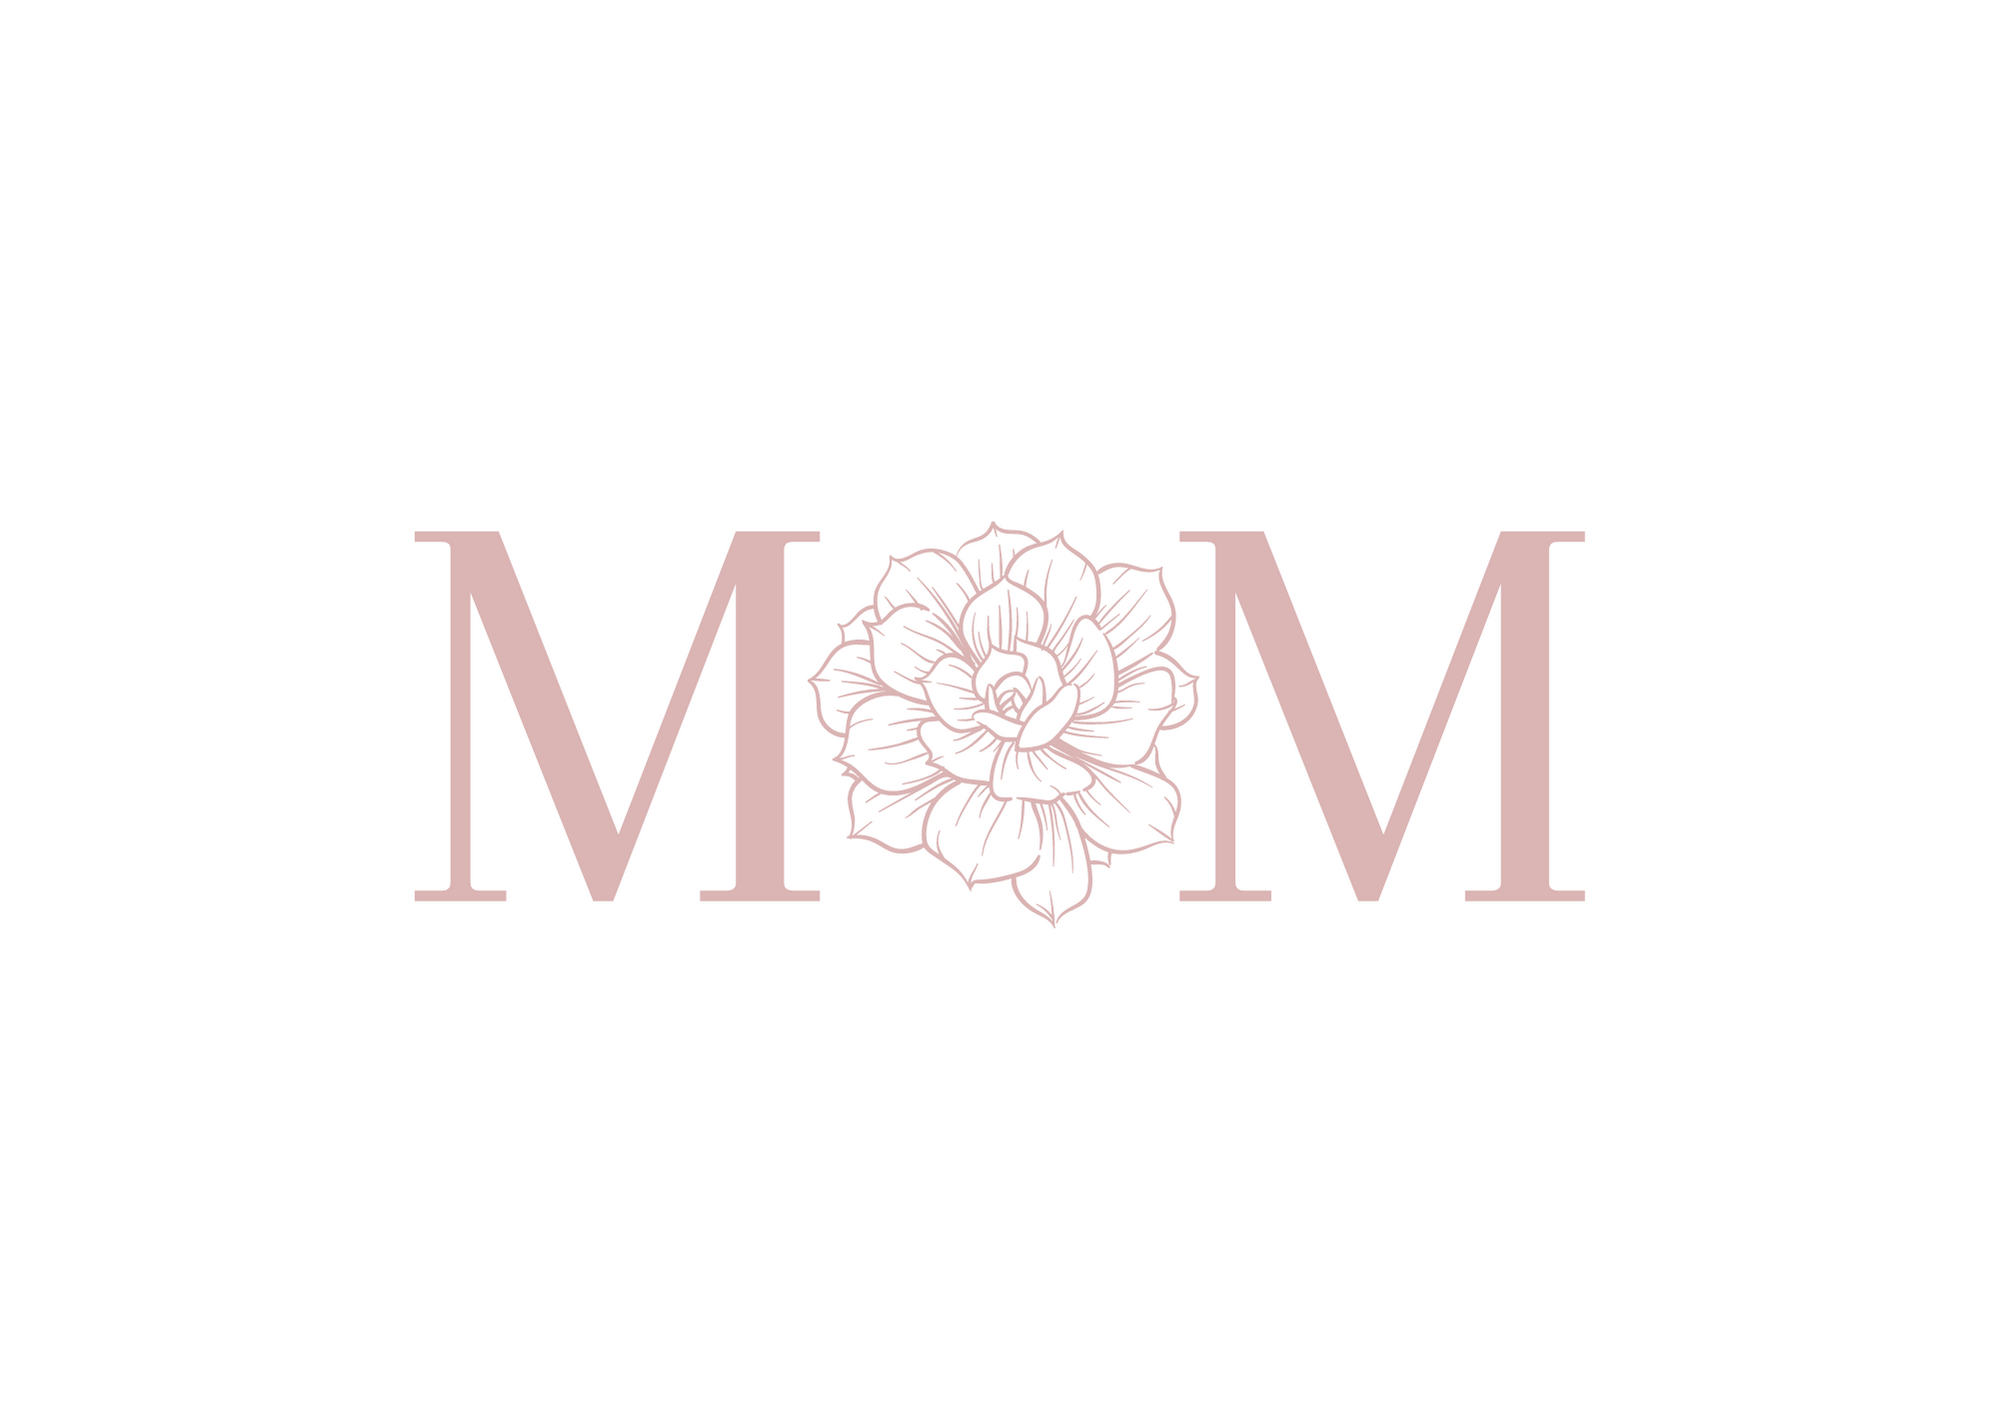 White seed paper greeting card saying "Mom" with o as a peach coloured flower